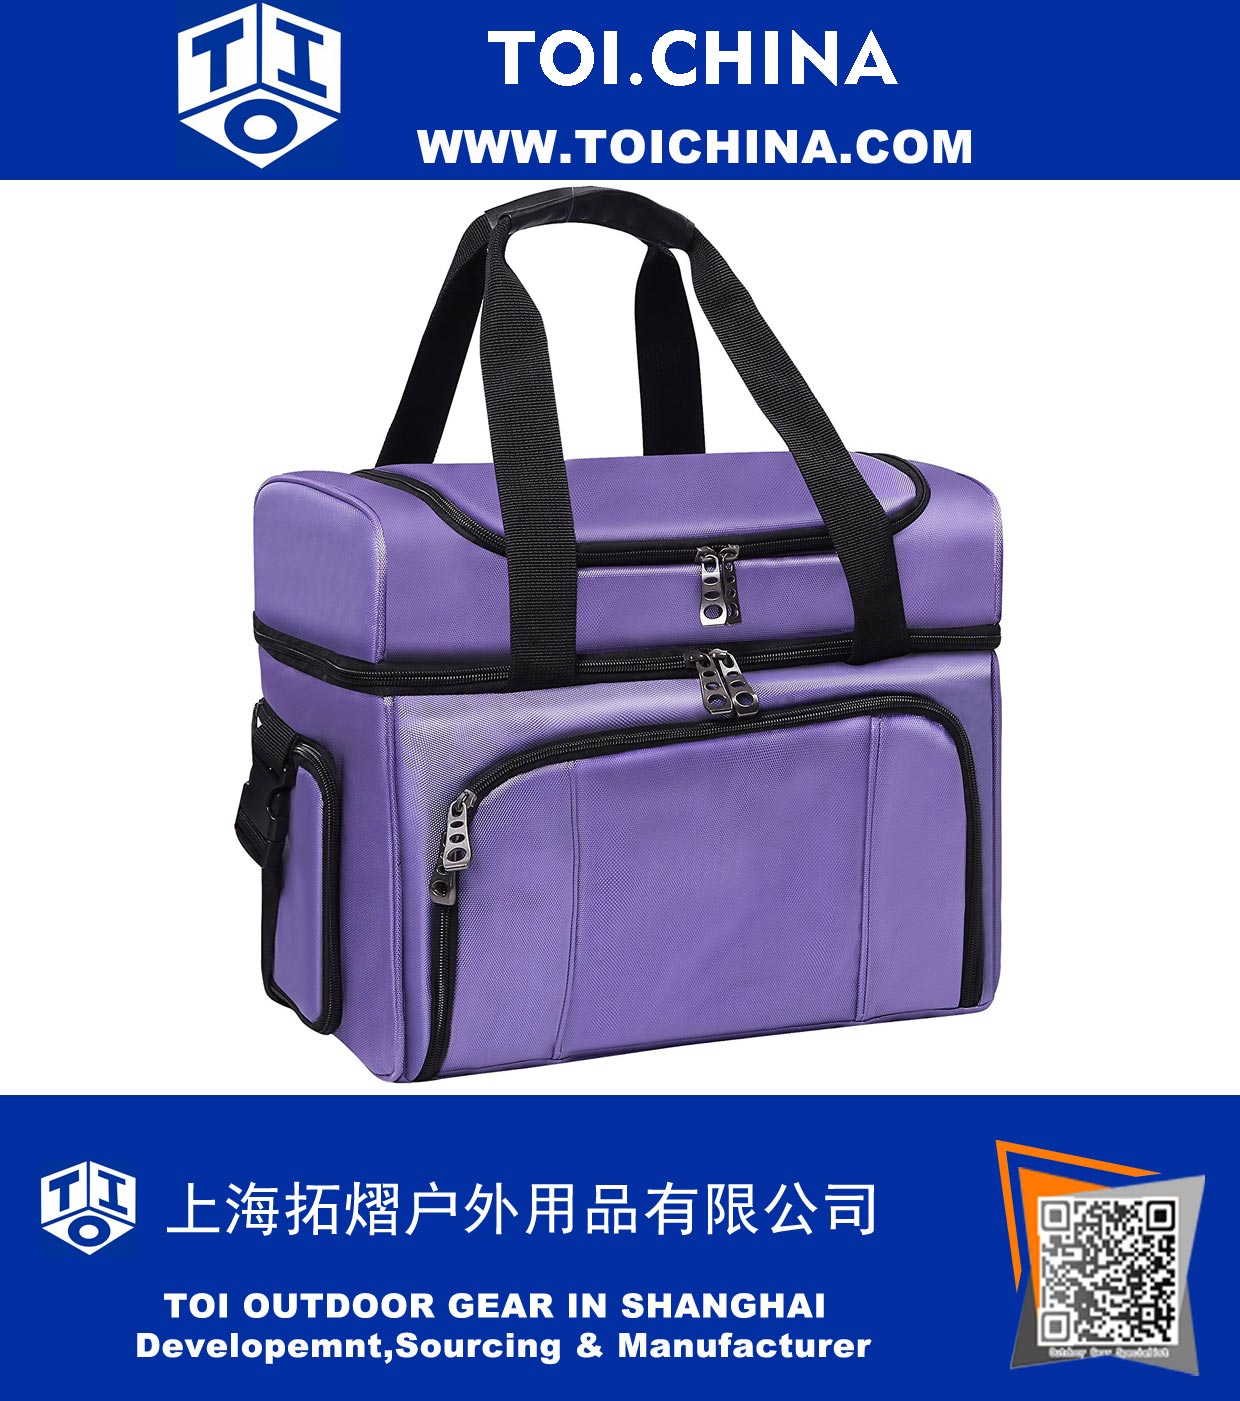 Cooler Bag - Dual Insulated Compartment. Aluminium foil, High-Density Insulation, 4 Heat-Sealed Removable Thick Peva Liners. Multiple Pockets - Soft Cooler Lunch Box